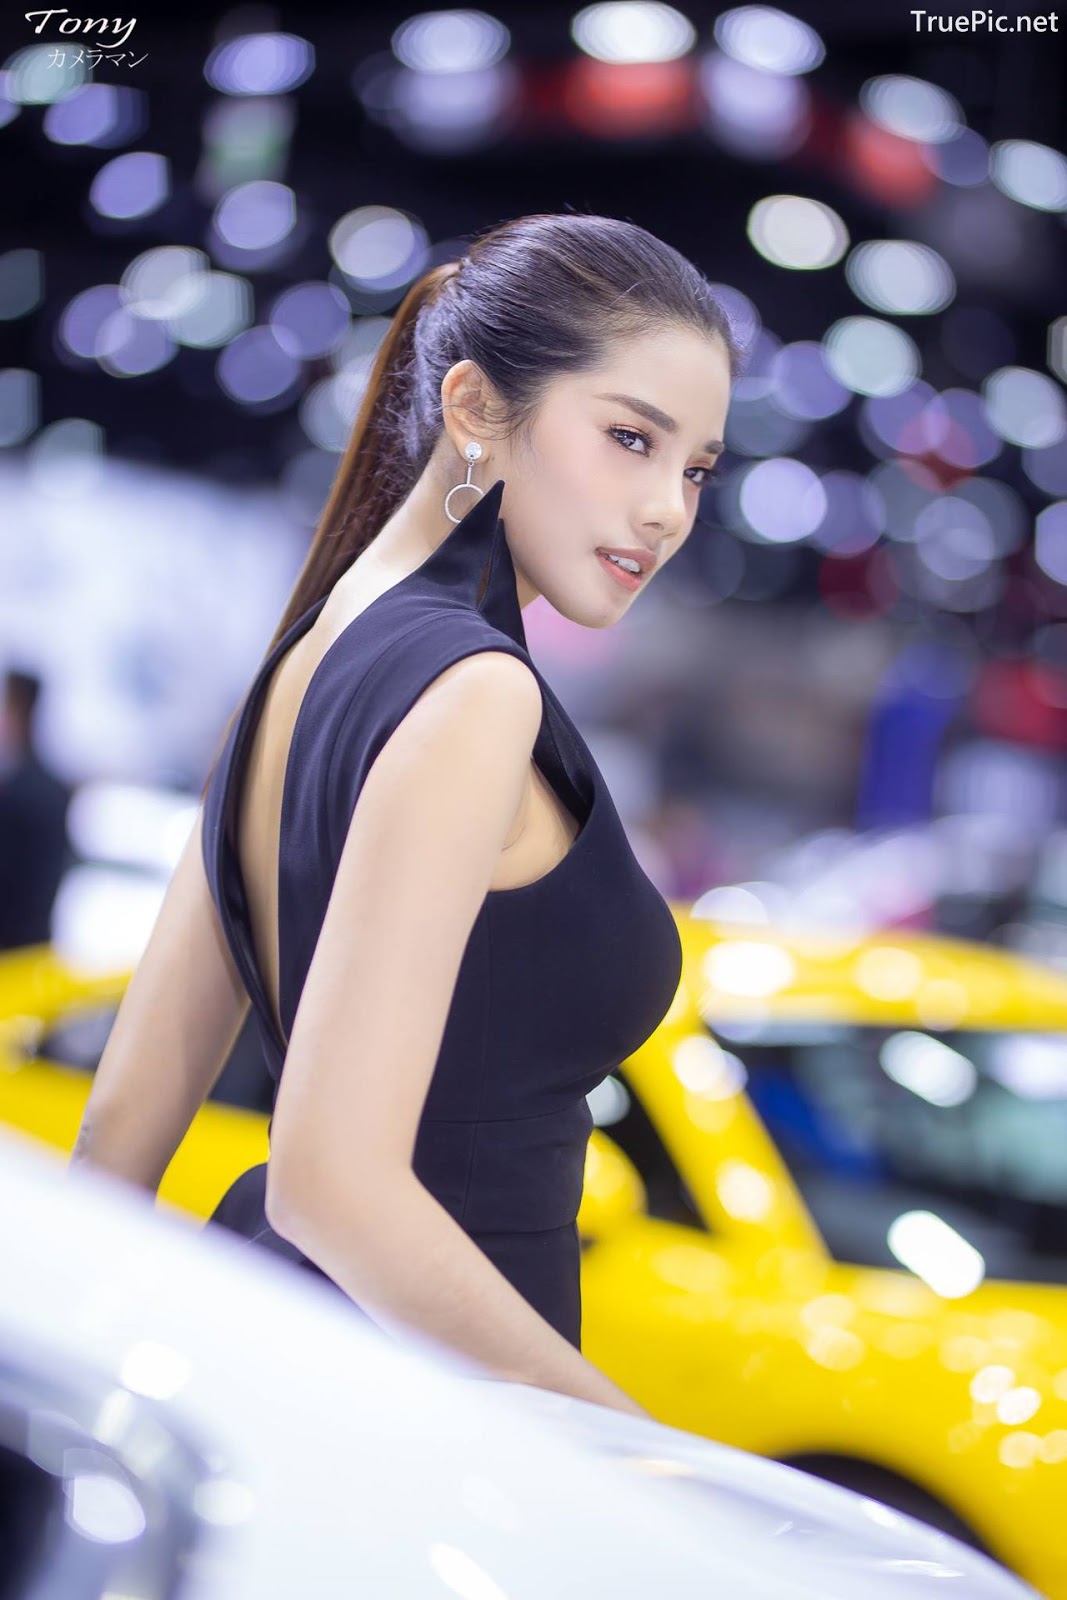 Image-Thailand-Hot-Model-Thai-Racing-Girl-At-Motor-Expo-2018-TruePic.net- Picture-61